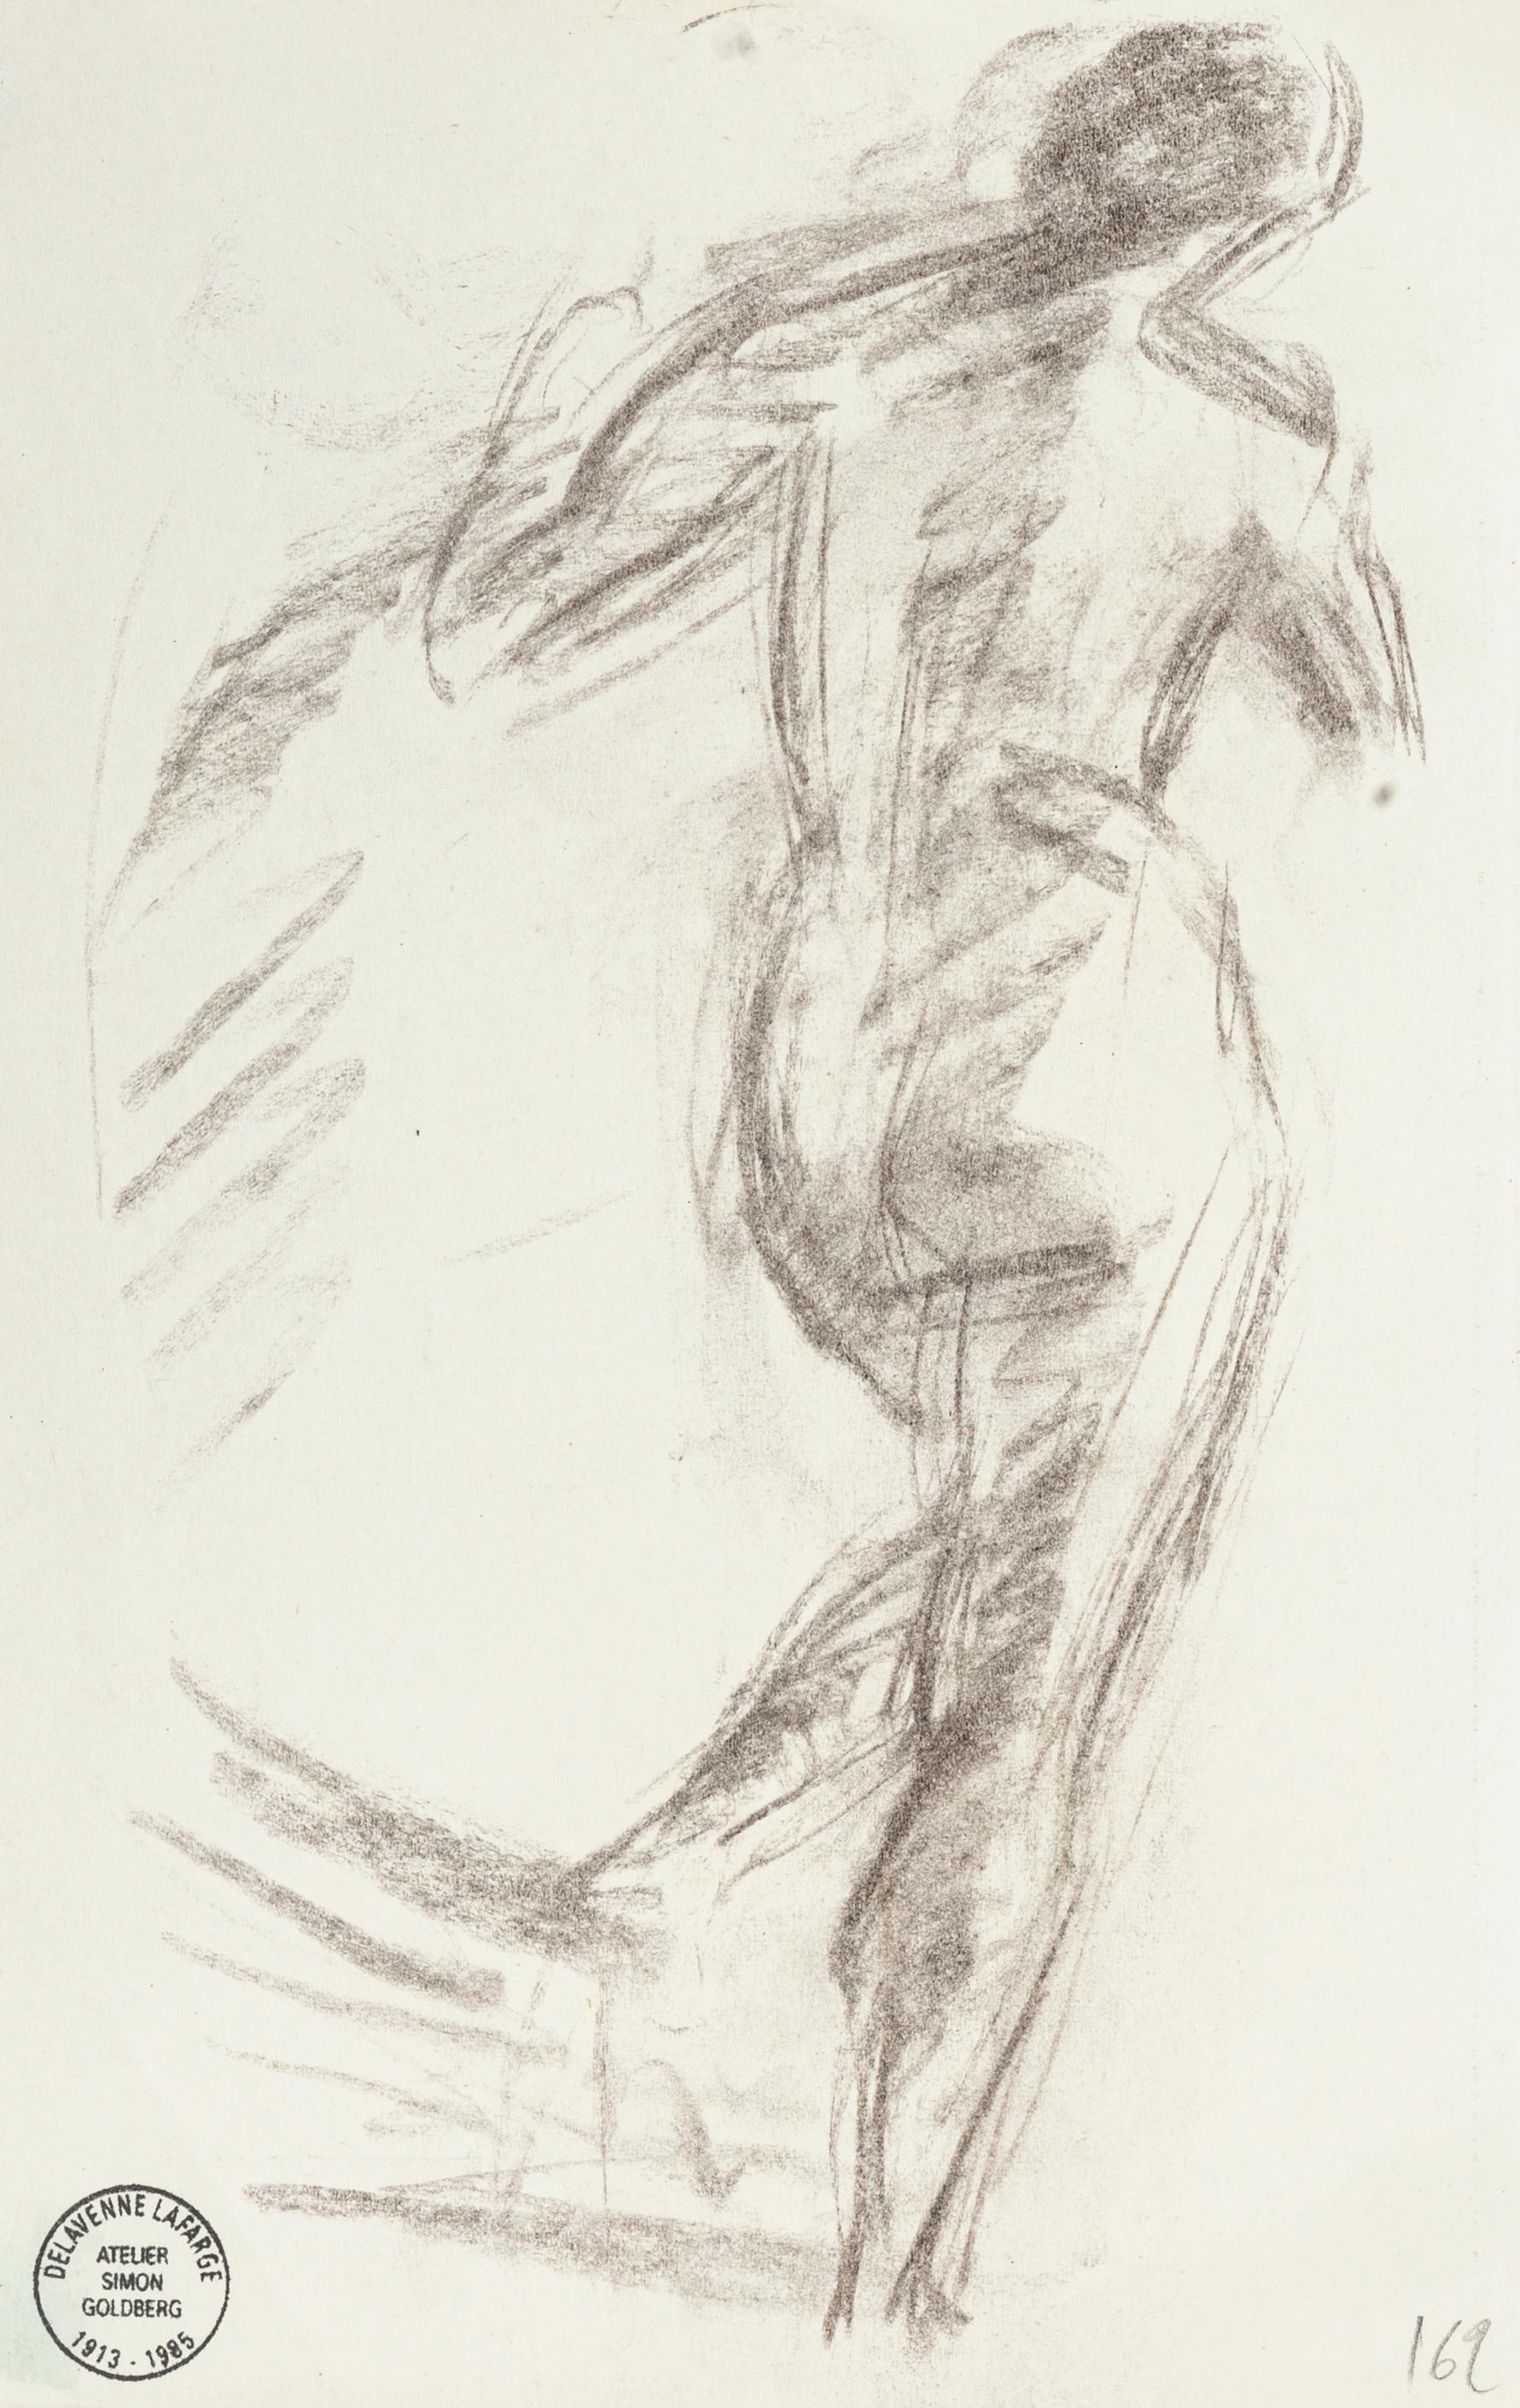 Nude from the Back - Original Pencil Drawing by S. Goldberg - Mid 20th Century